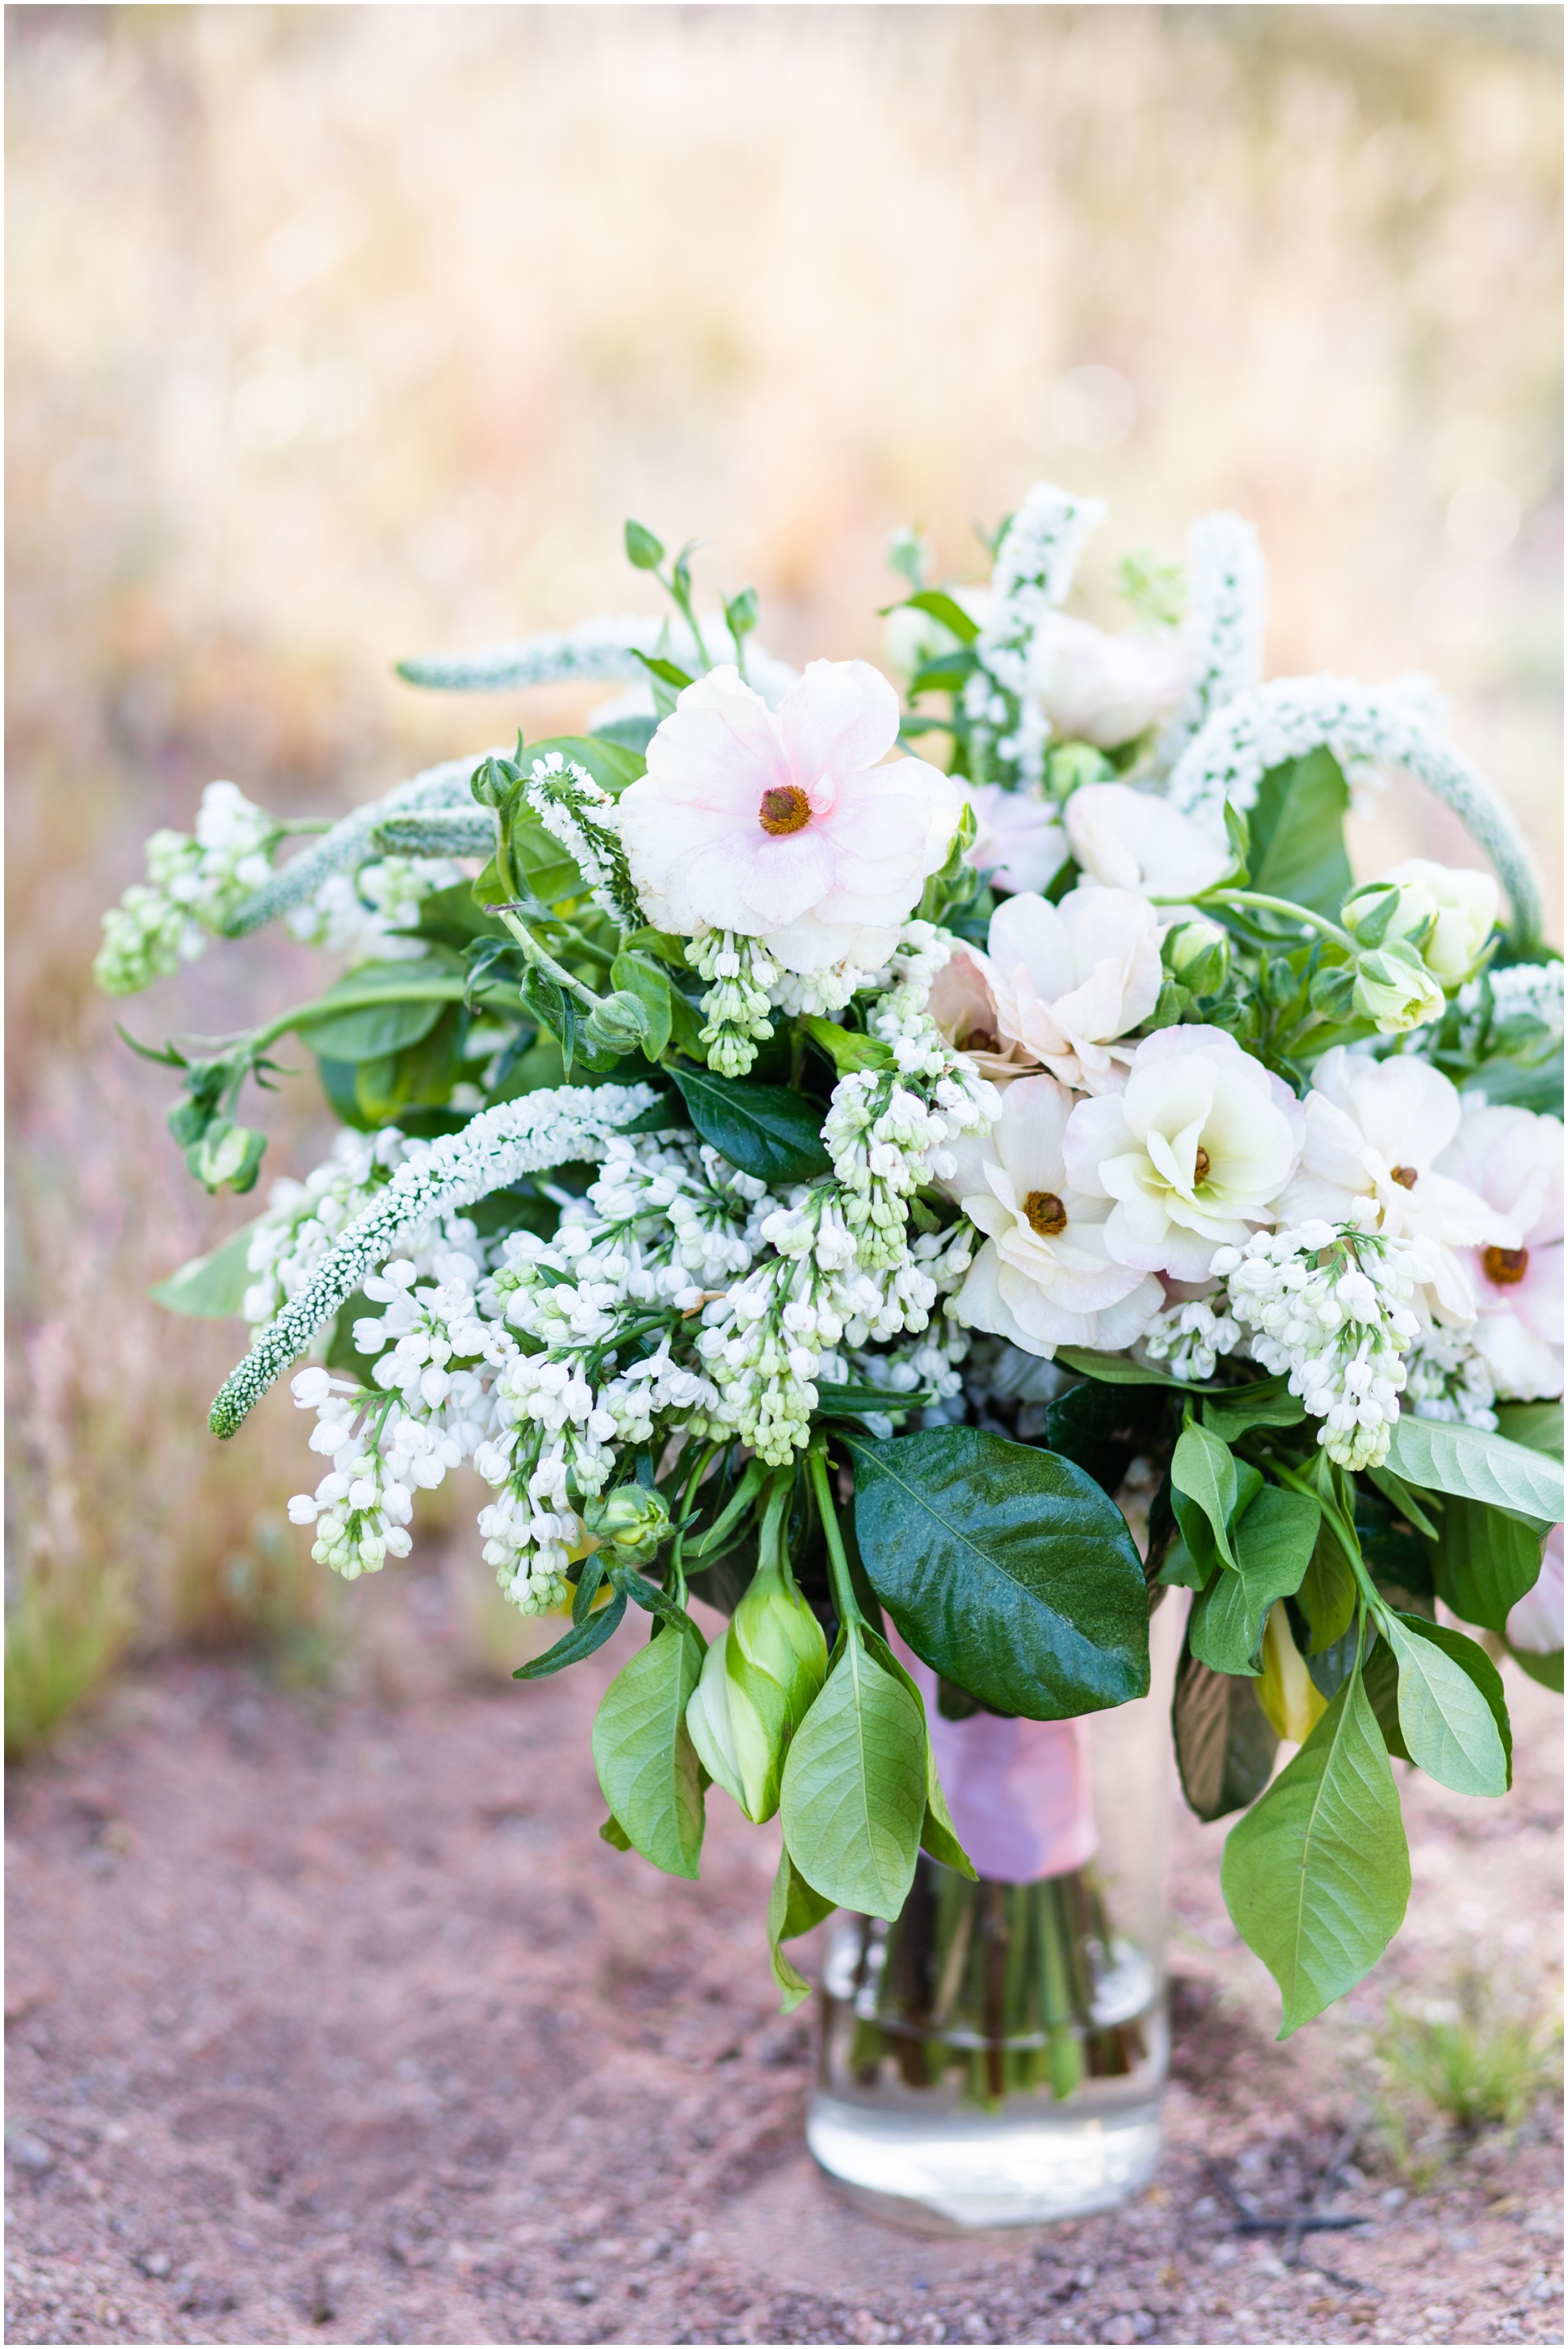 Bouquet of Garden greens and blush flowers by butterfly petals in a glass vase